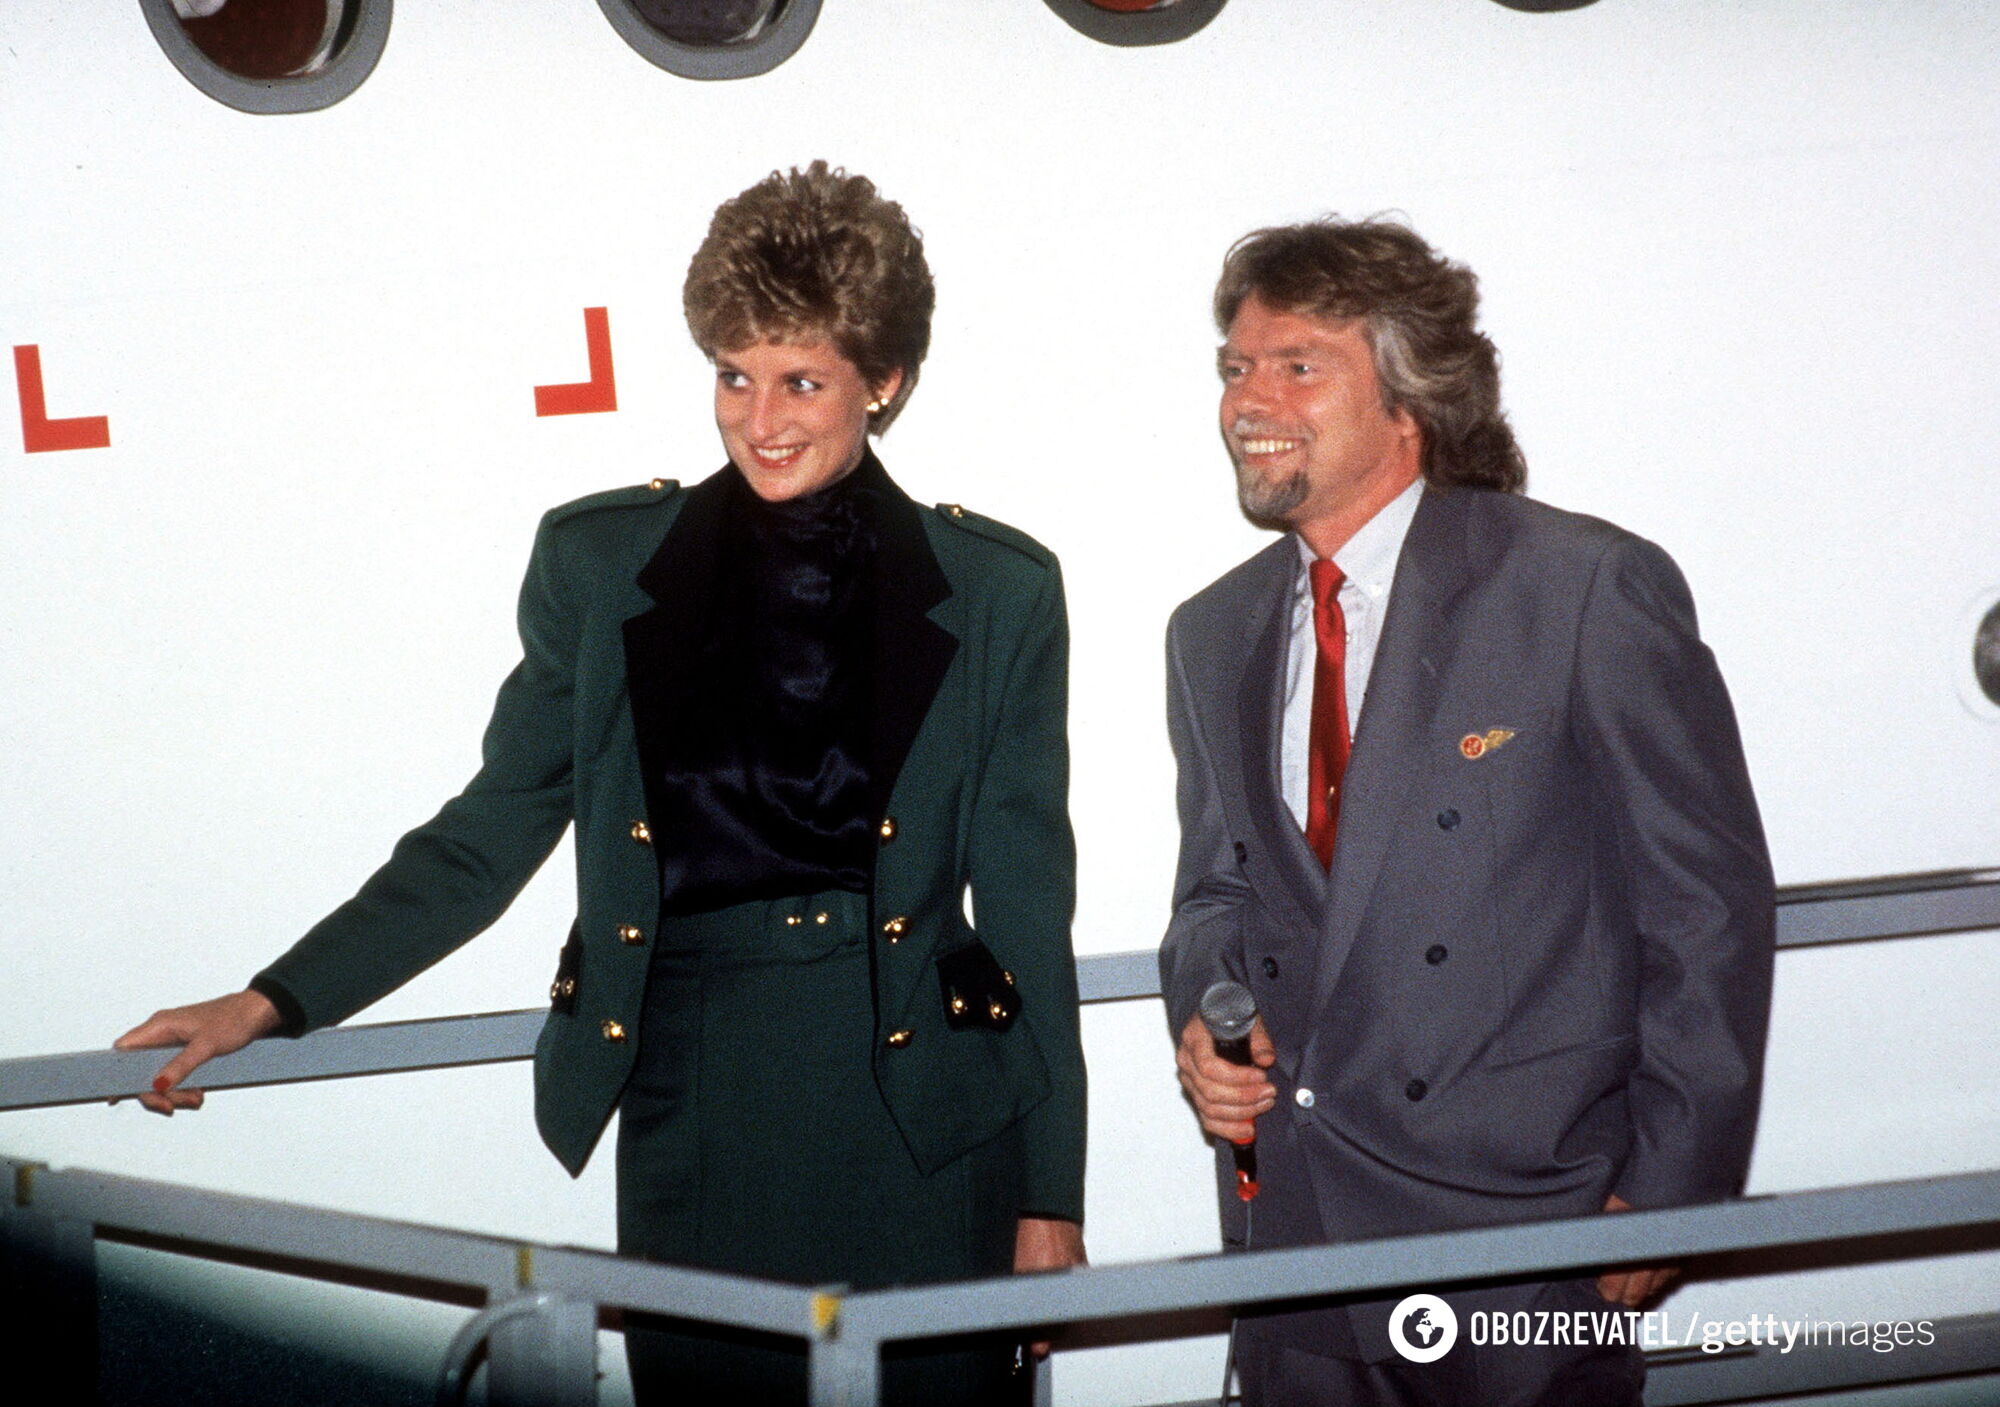 ''Immodest and a real gossip'': 5 amazing stories about Princess Diana told by celebrities